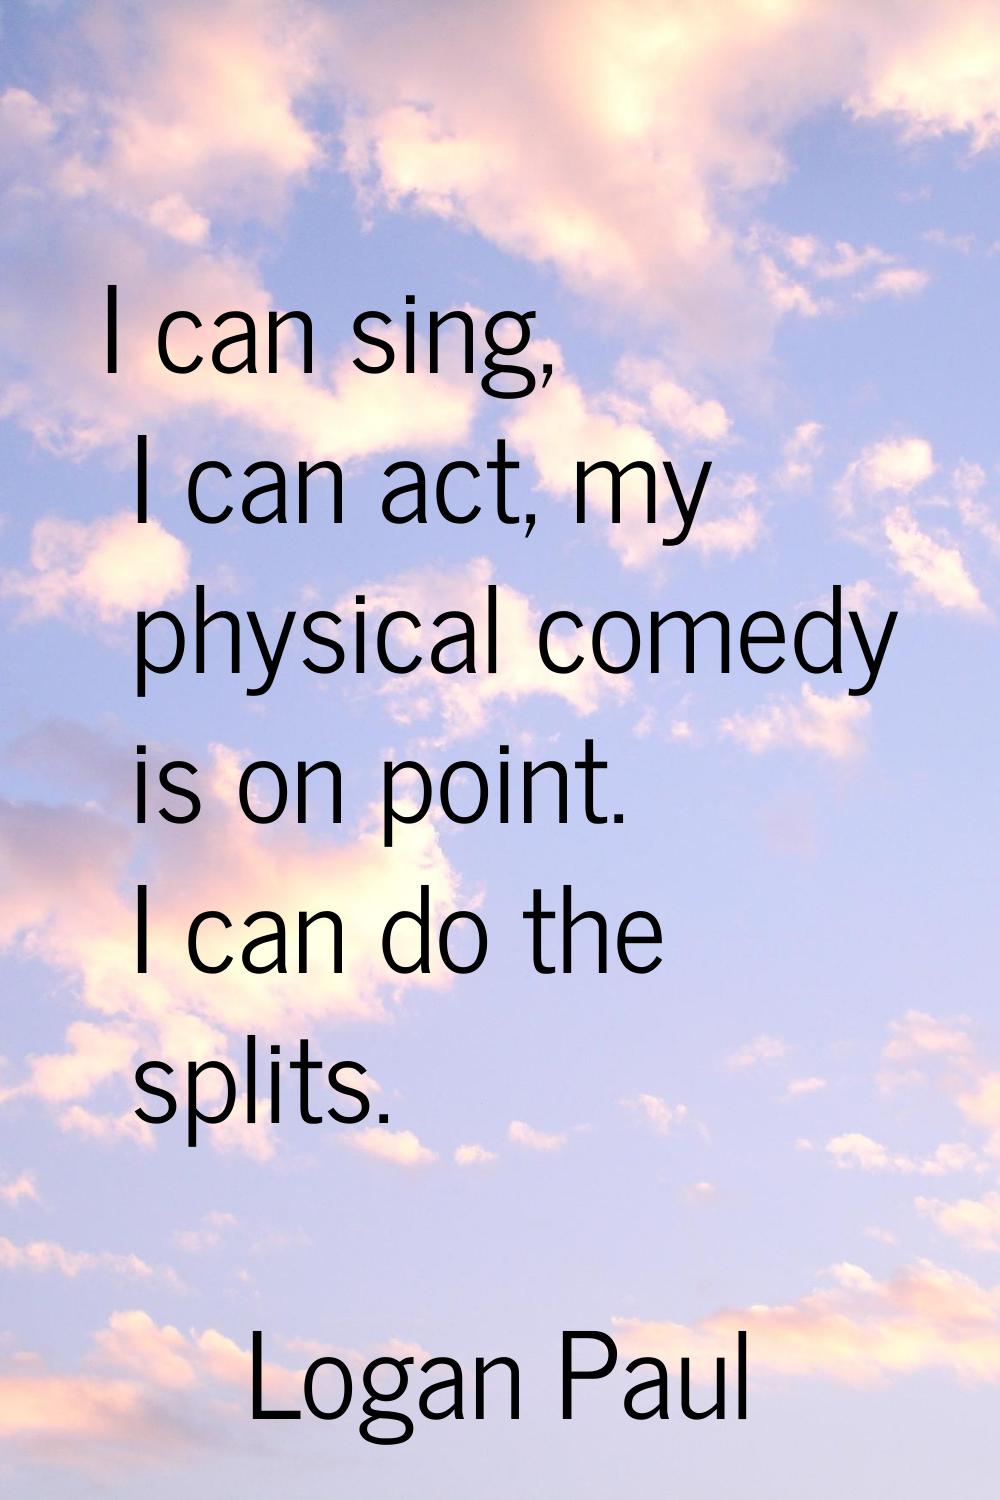 I can sing, I can act, my physical comedy is on point. I can do the splits.